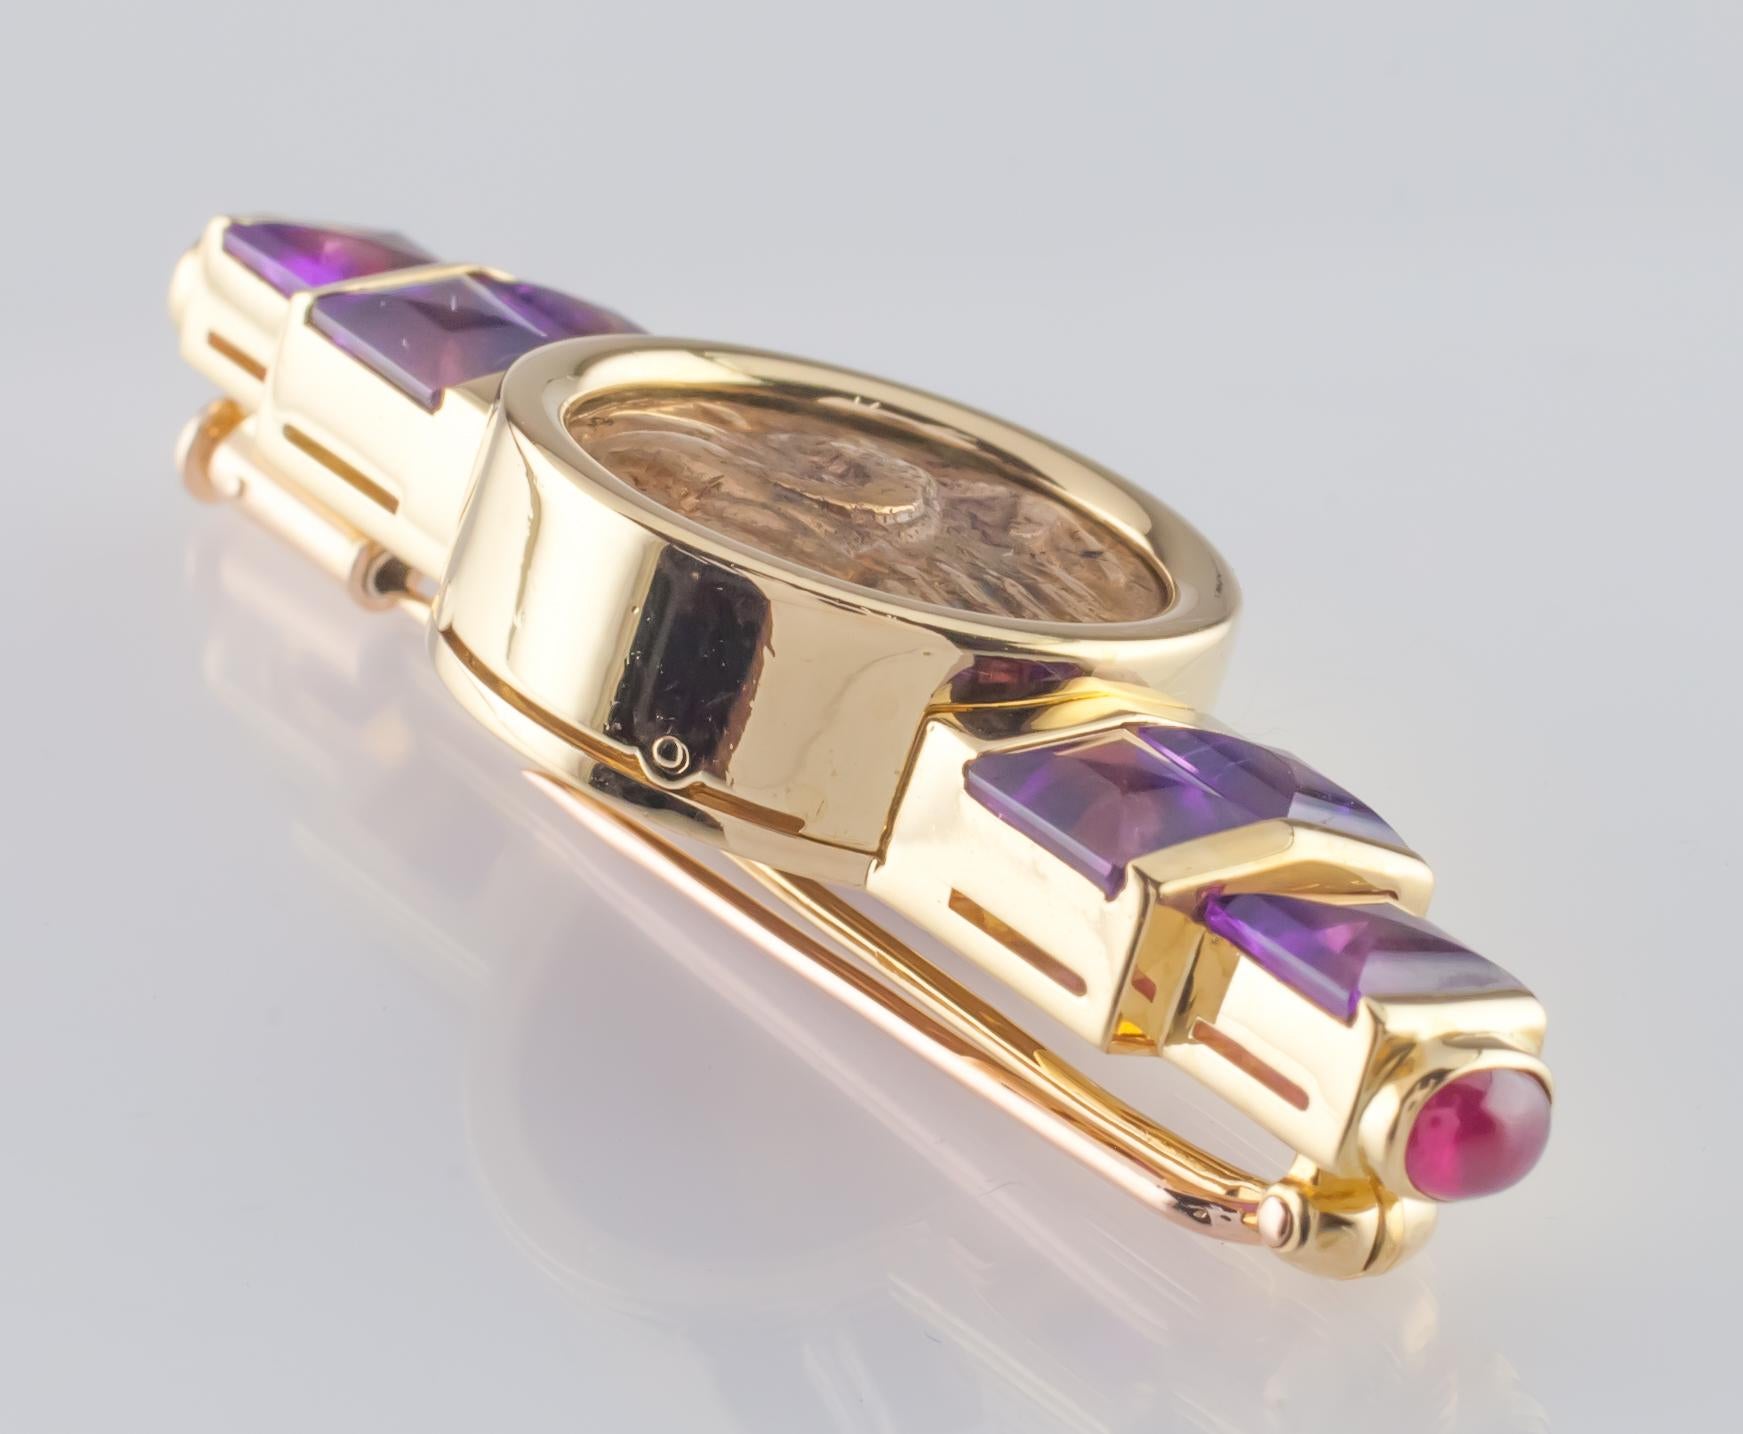 Bulgari Monete Brooch with Point-Cut Amethyst and Ruby Cabochon Accents
Hallmarked with coin variety: MACEDONIA PHILIPPI 4TH CENTURY
Serial #BD 8996
Total Width of Brooch = 52 mm
Length of Brooch = 19 mm
Total Mass = 24.0 grams